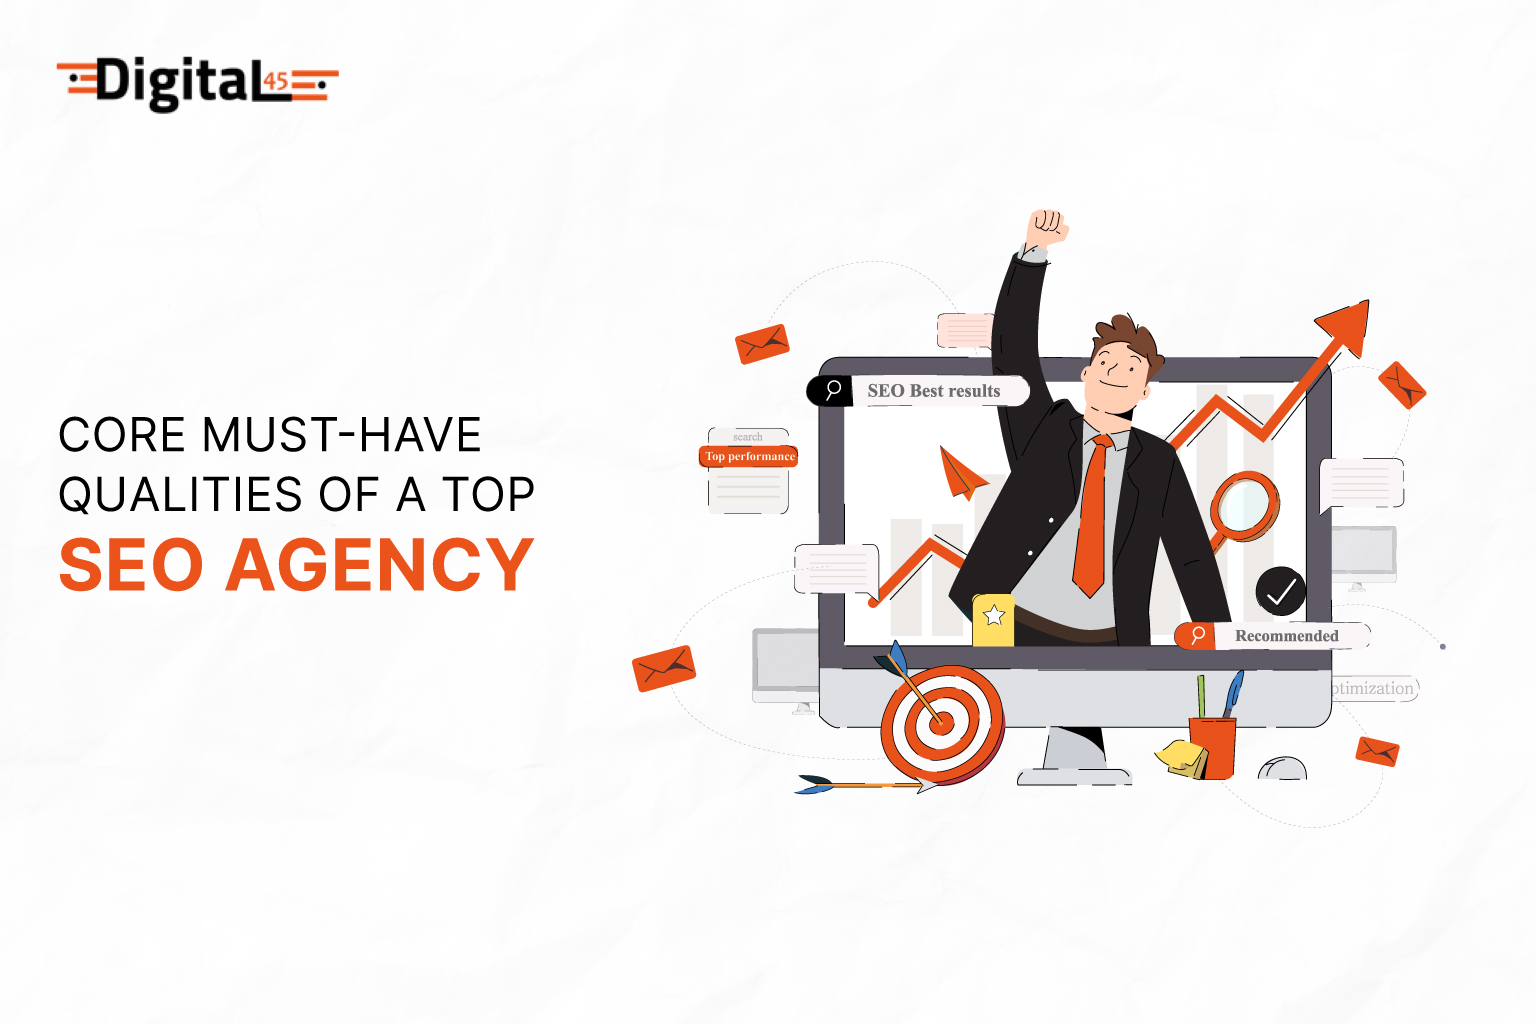 Core Must-Have Qualities of a Top SEO Agency